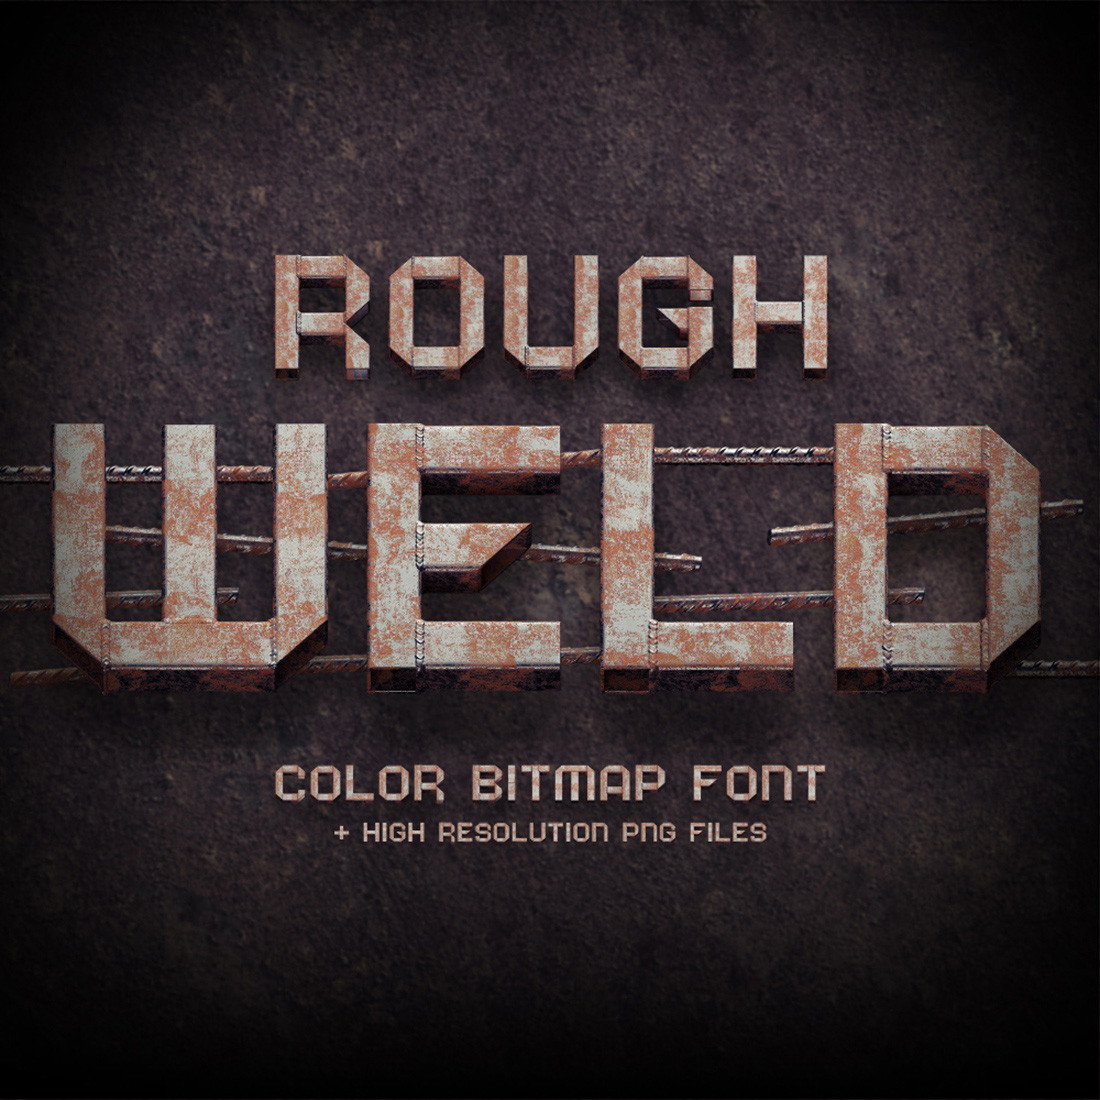 Rough Weld – Color Bitmap Font cover iamge.